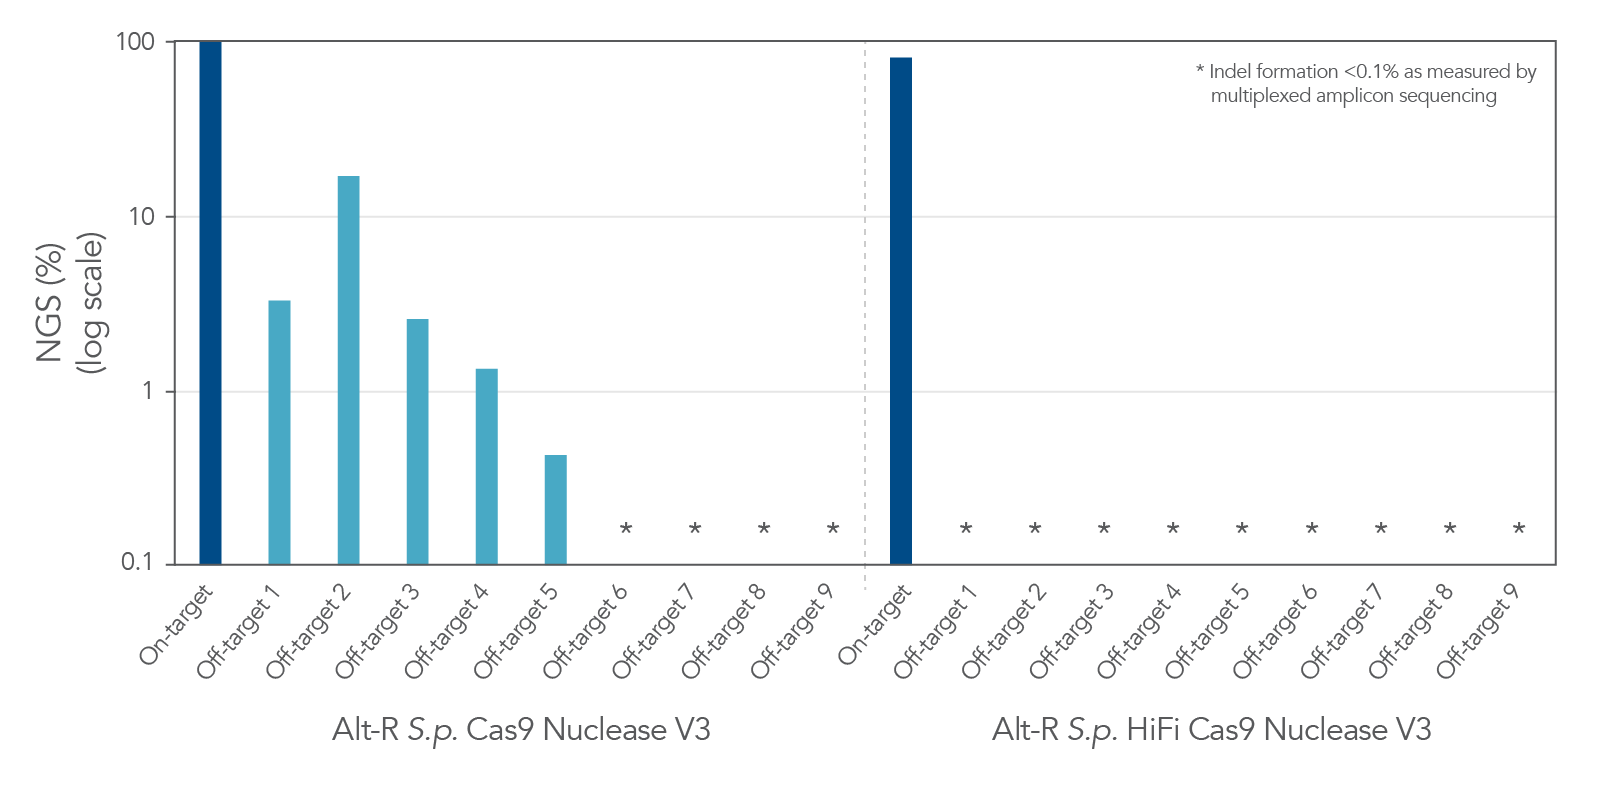 Alt-R S.p. HiFi Cas9 Nuclease V3 facilitates near-WT on‑target editing potency and reduces off-target site editing